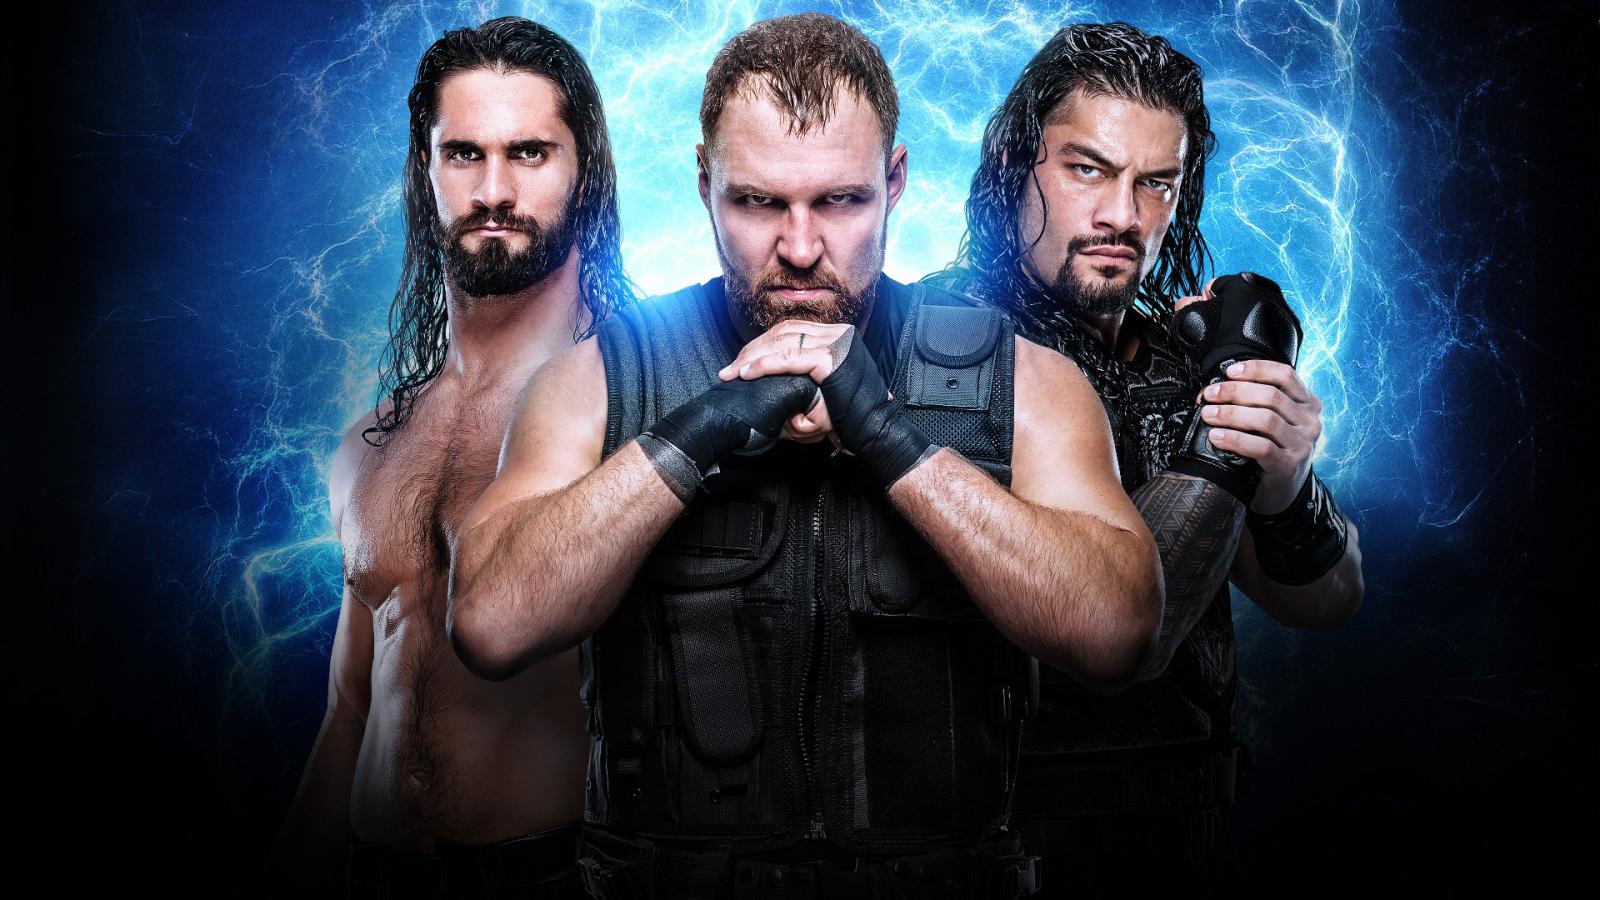 Wwe the shield theme song